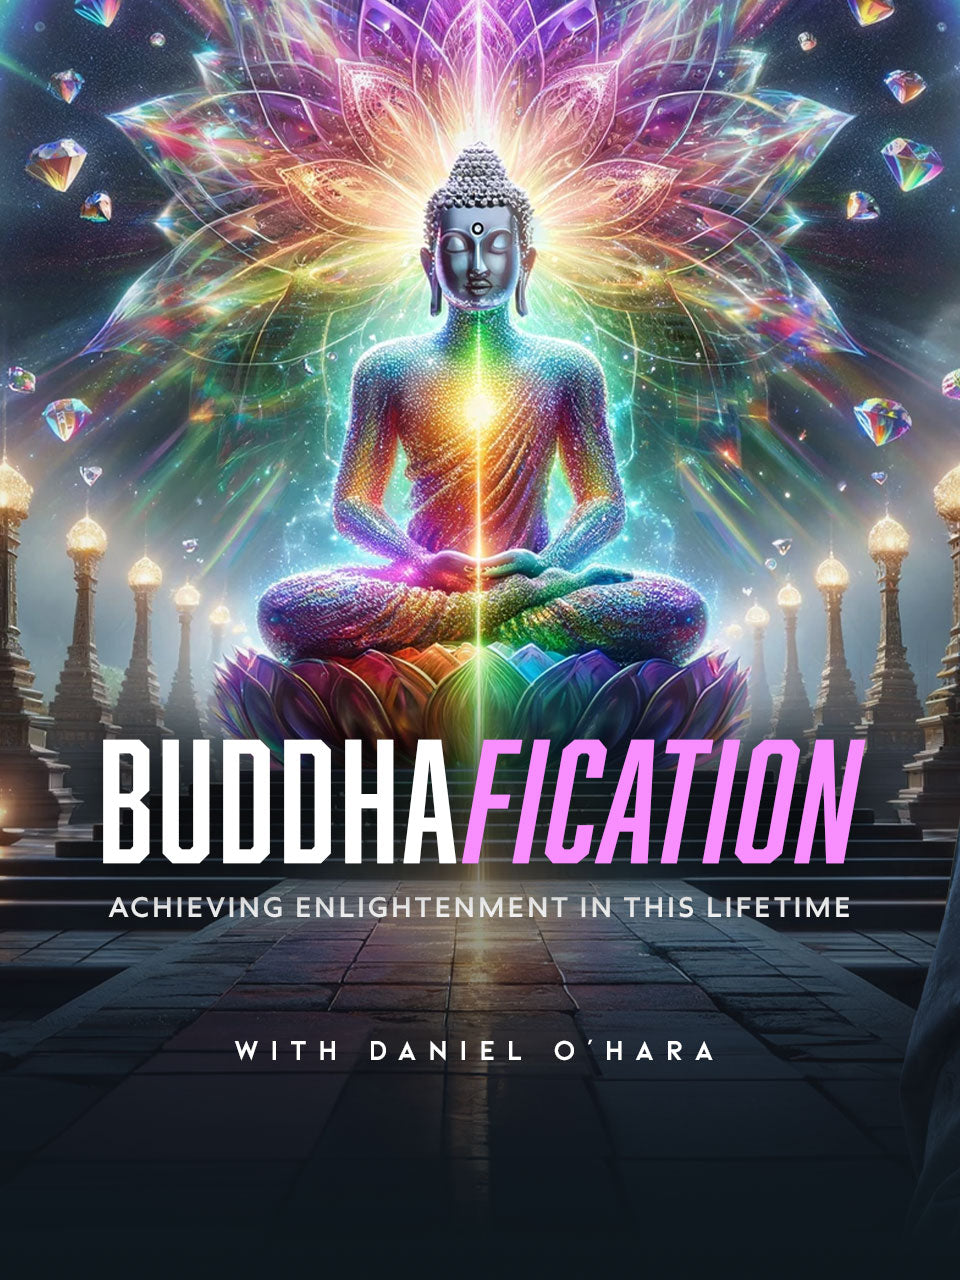 Buddhafication: Achieving Enlightenment In This Lifetime